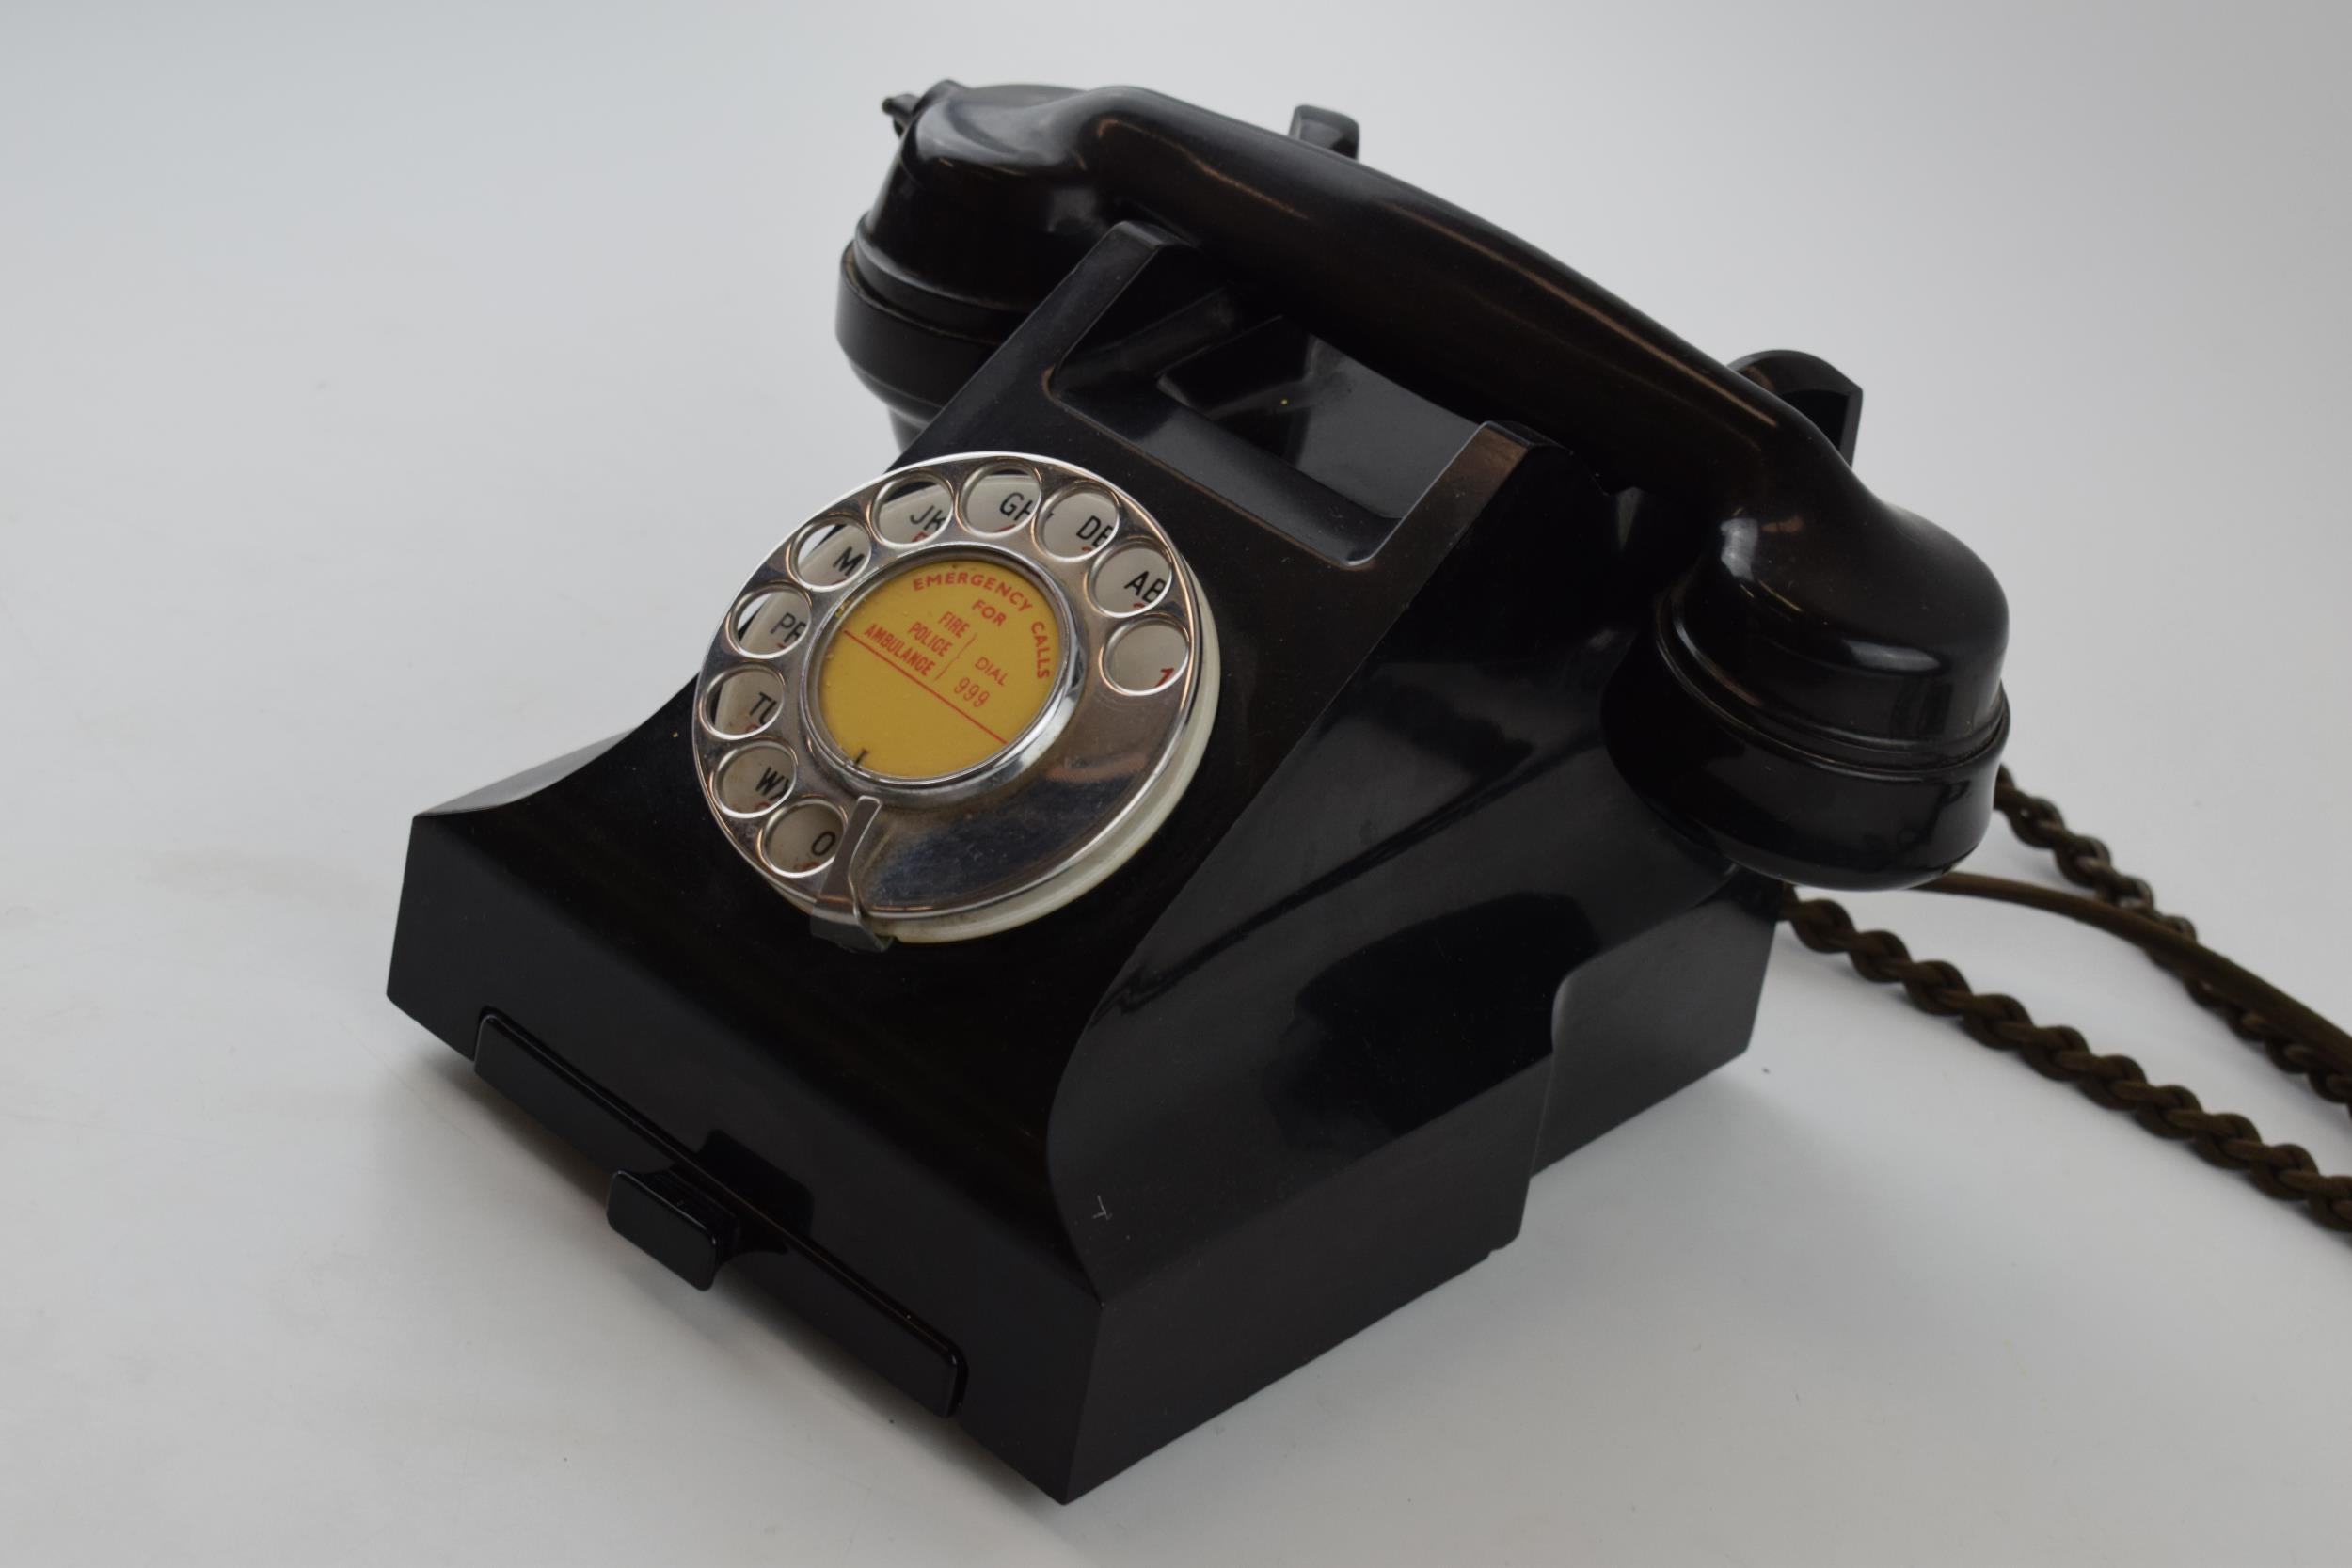 Vintage bakelite telephone and base, with wire. - Image 3 of 4